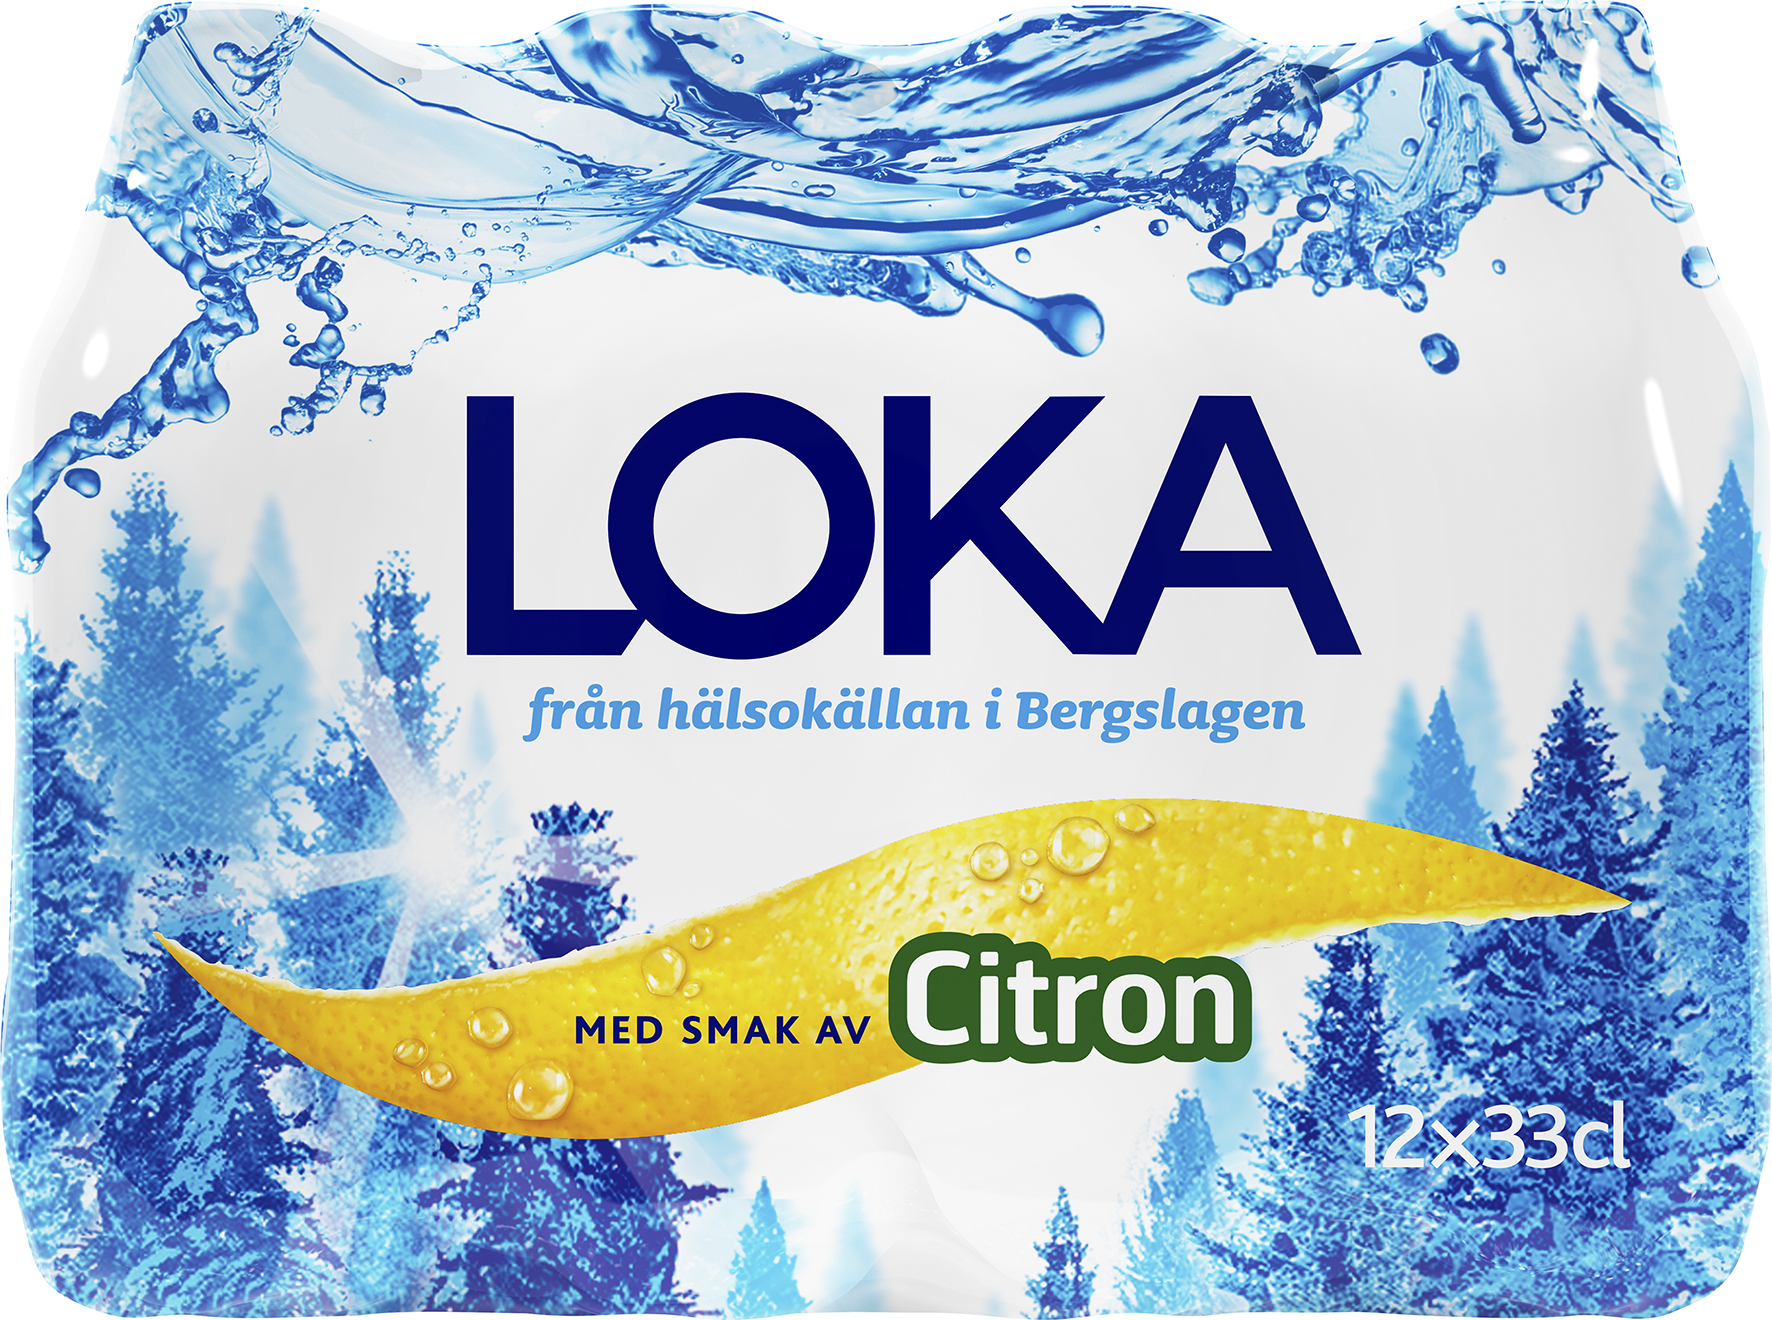 [8551913] Loka citron PET 33cl 12pack in